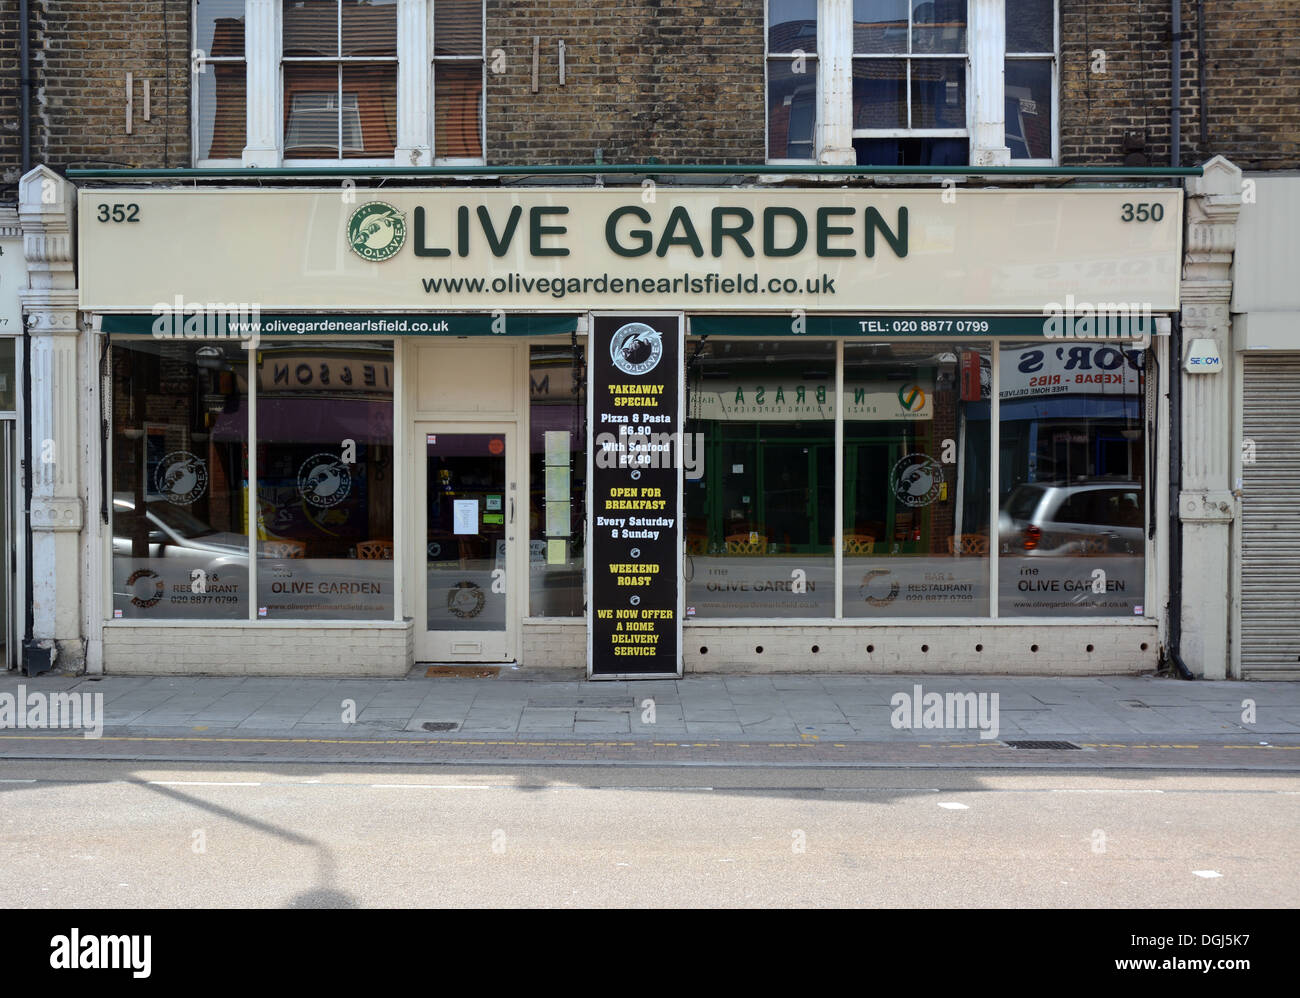 The Olive Garden Restaurant and Bar on Garratt Lane in affluent and gentrified Earlsfield south west London sw18 Stock Photo